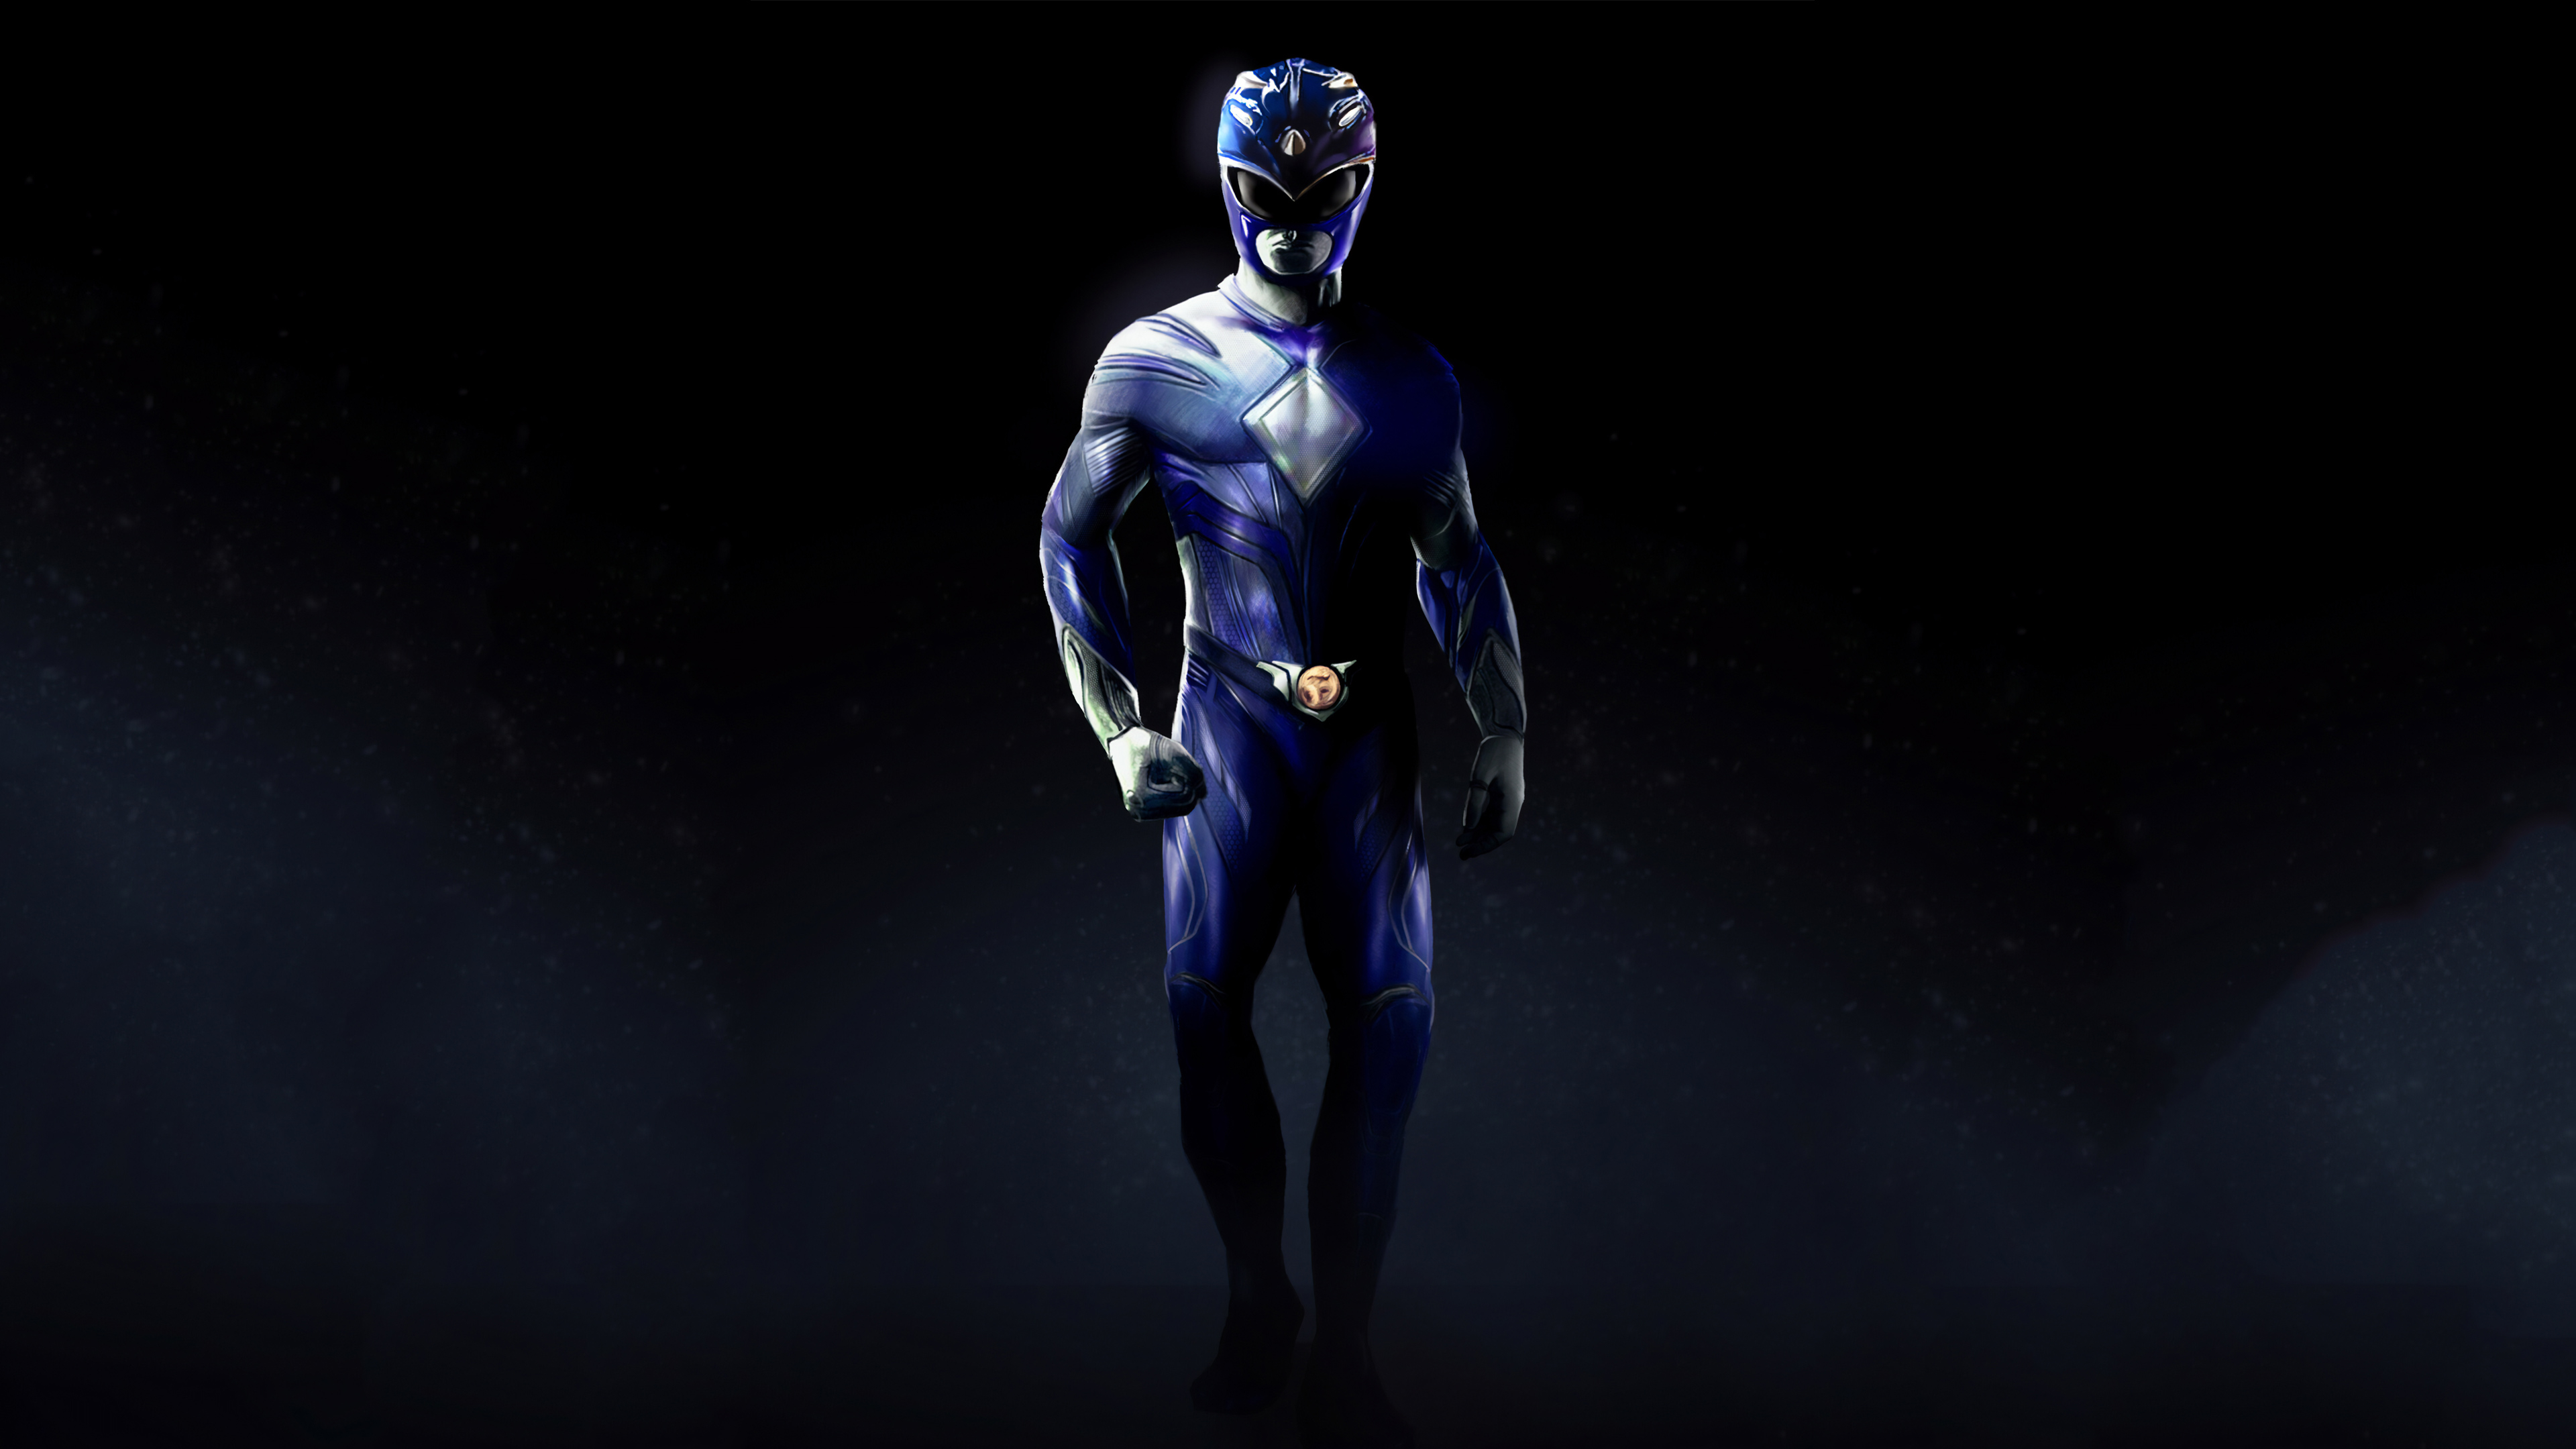 3840x2160 Power Rangers Zack, HD Superheroes, 4k Wallpapers, Images, Backgrounds, Photos and Pictures